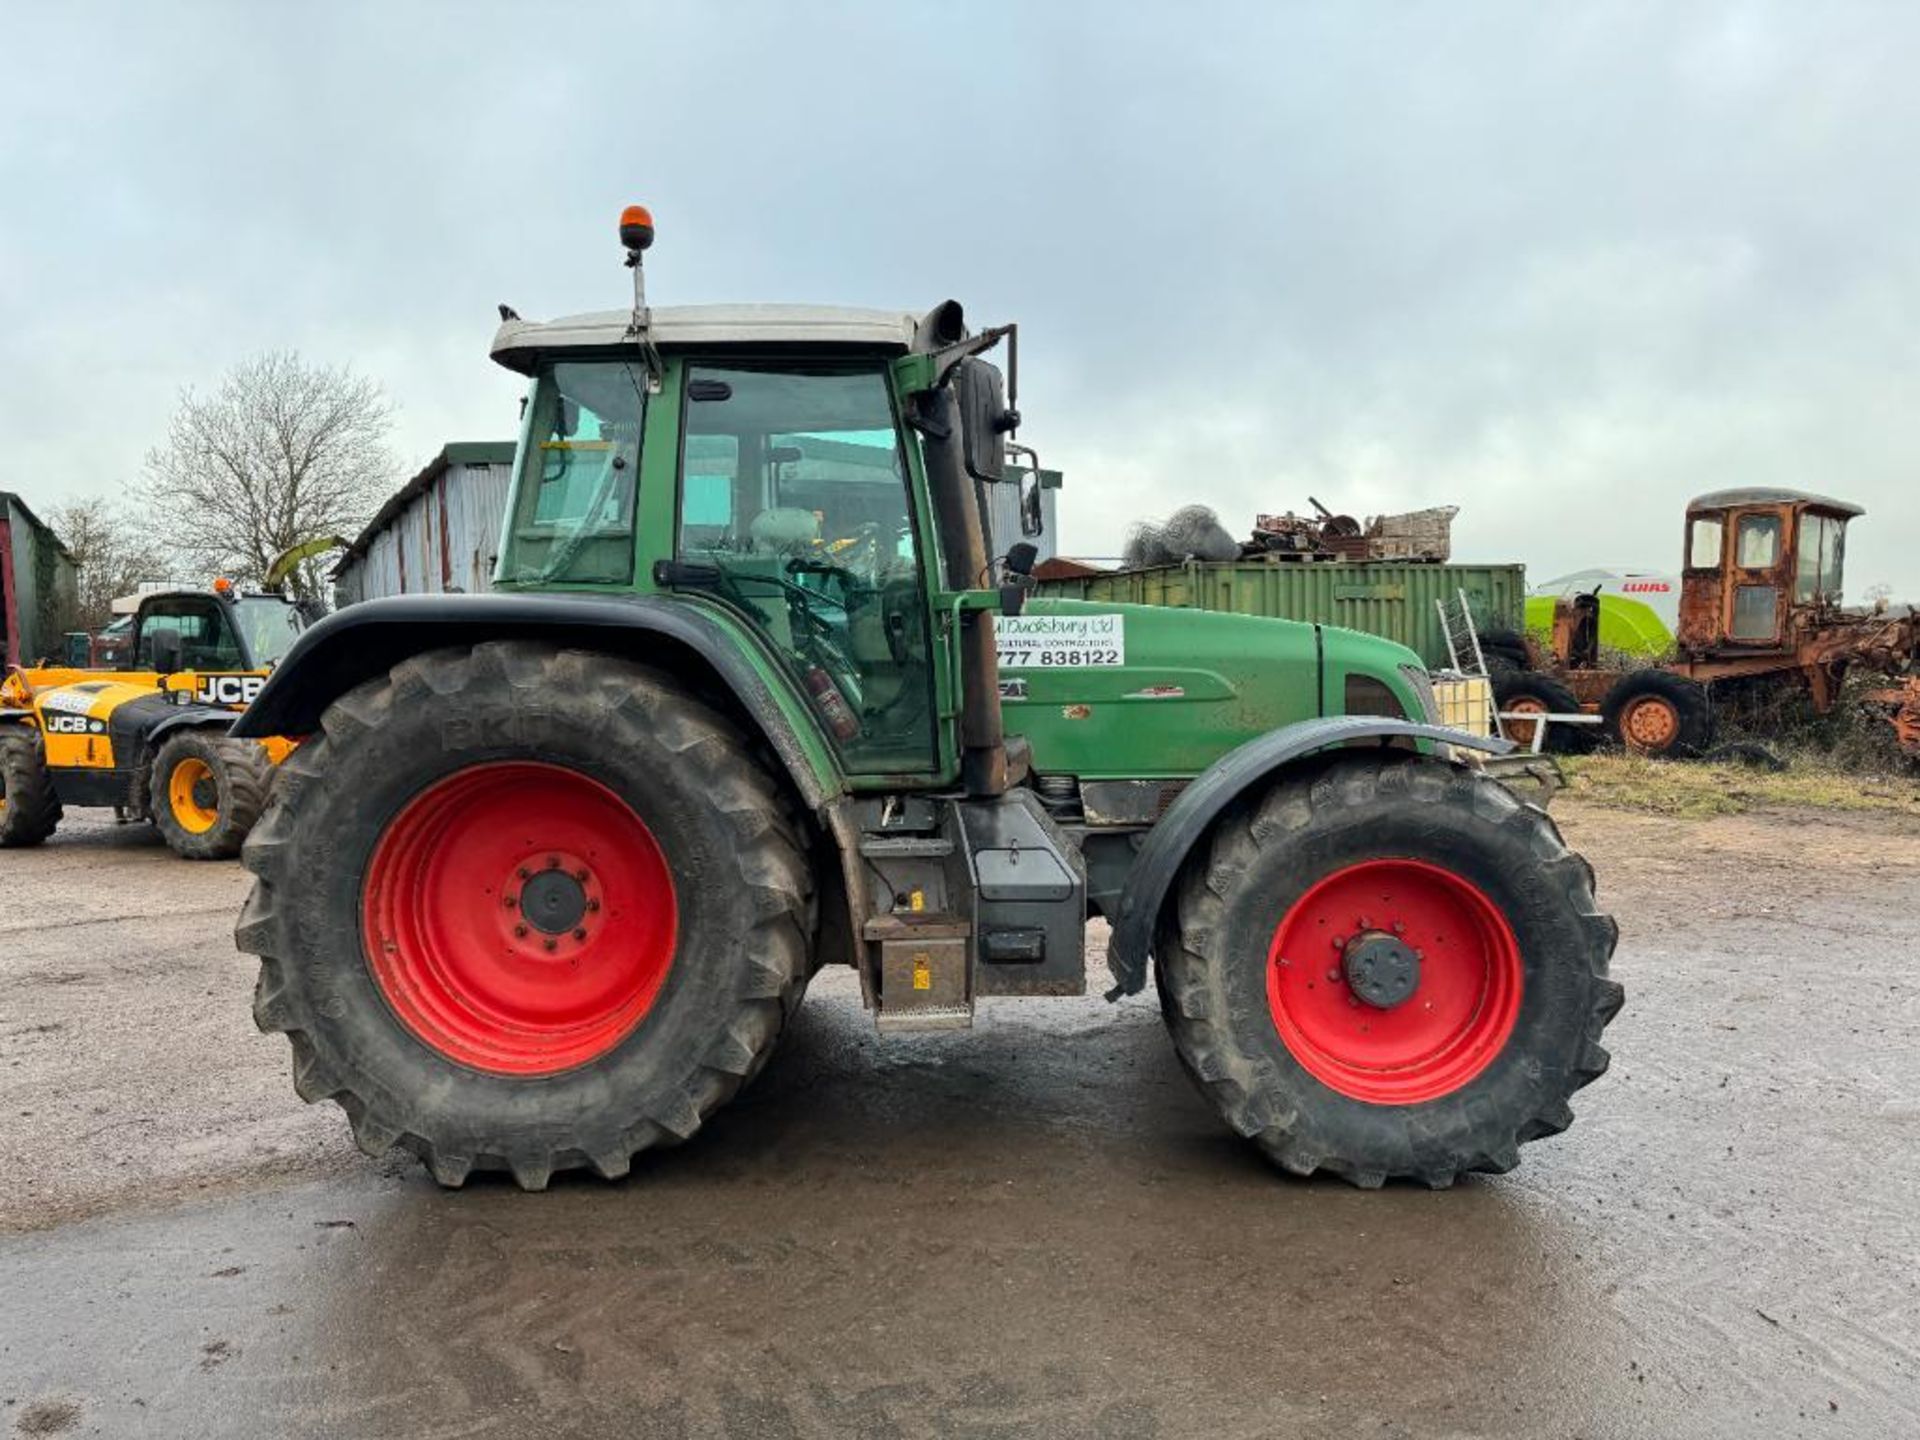 2001 Fendt 716 Vario 50kph 4wd tractor with 4 electric spools, air brakes and front linkage on BKT 5 - Image 22 of 22